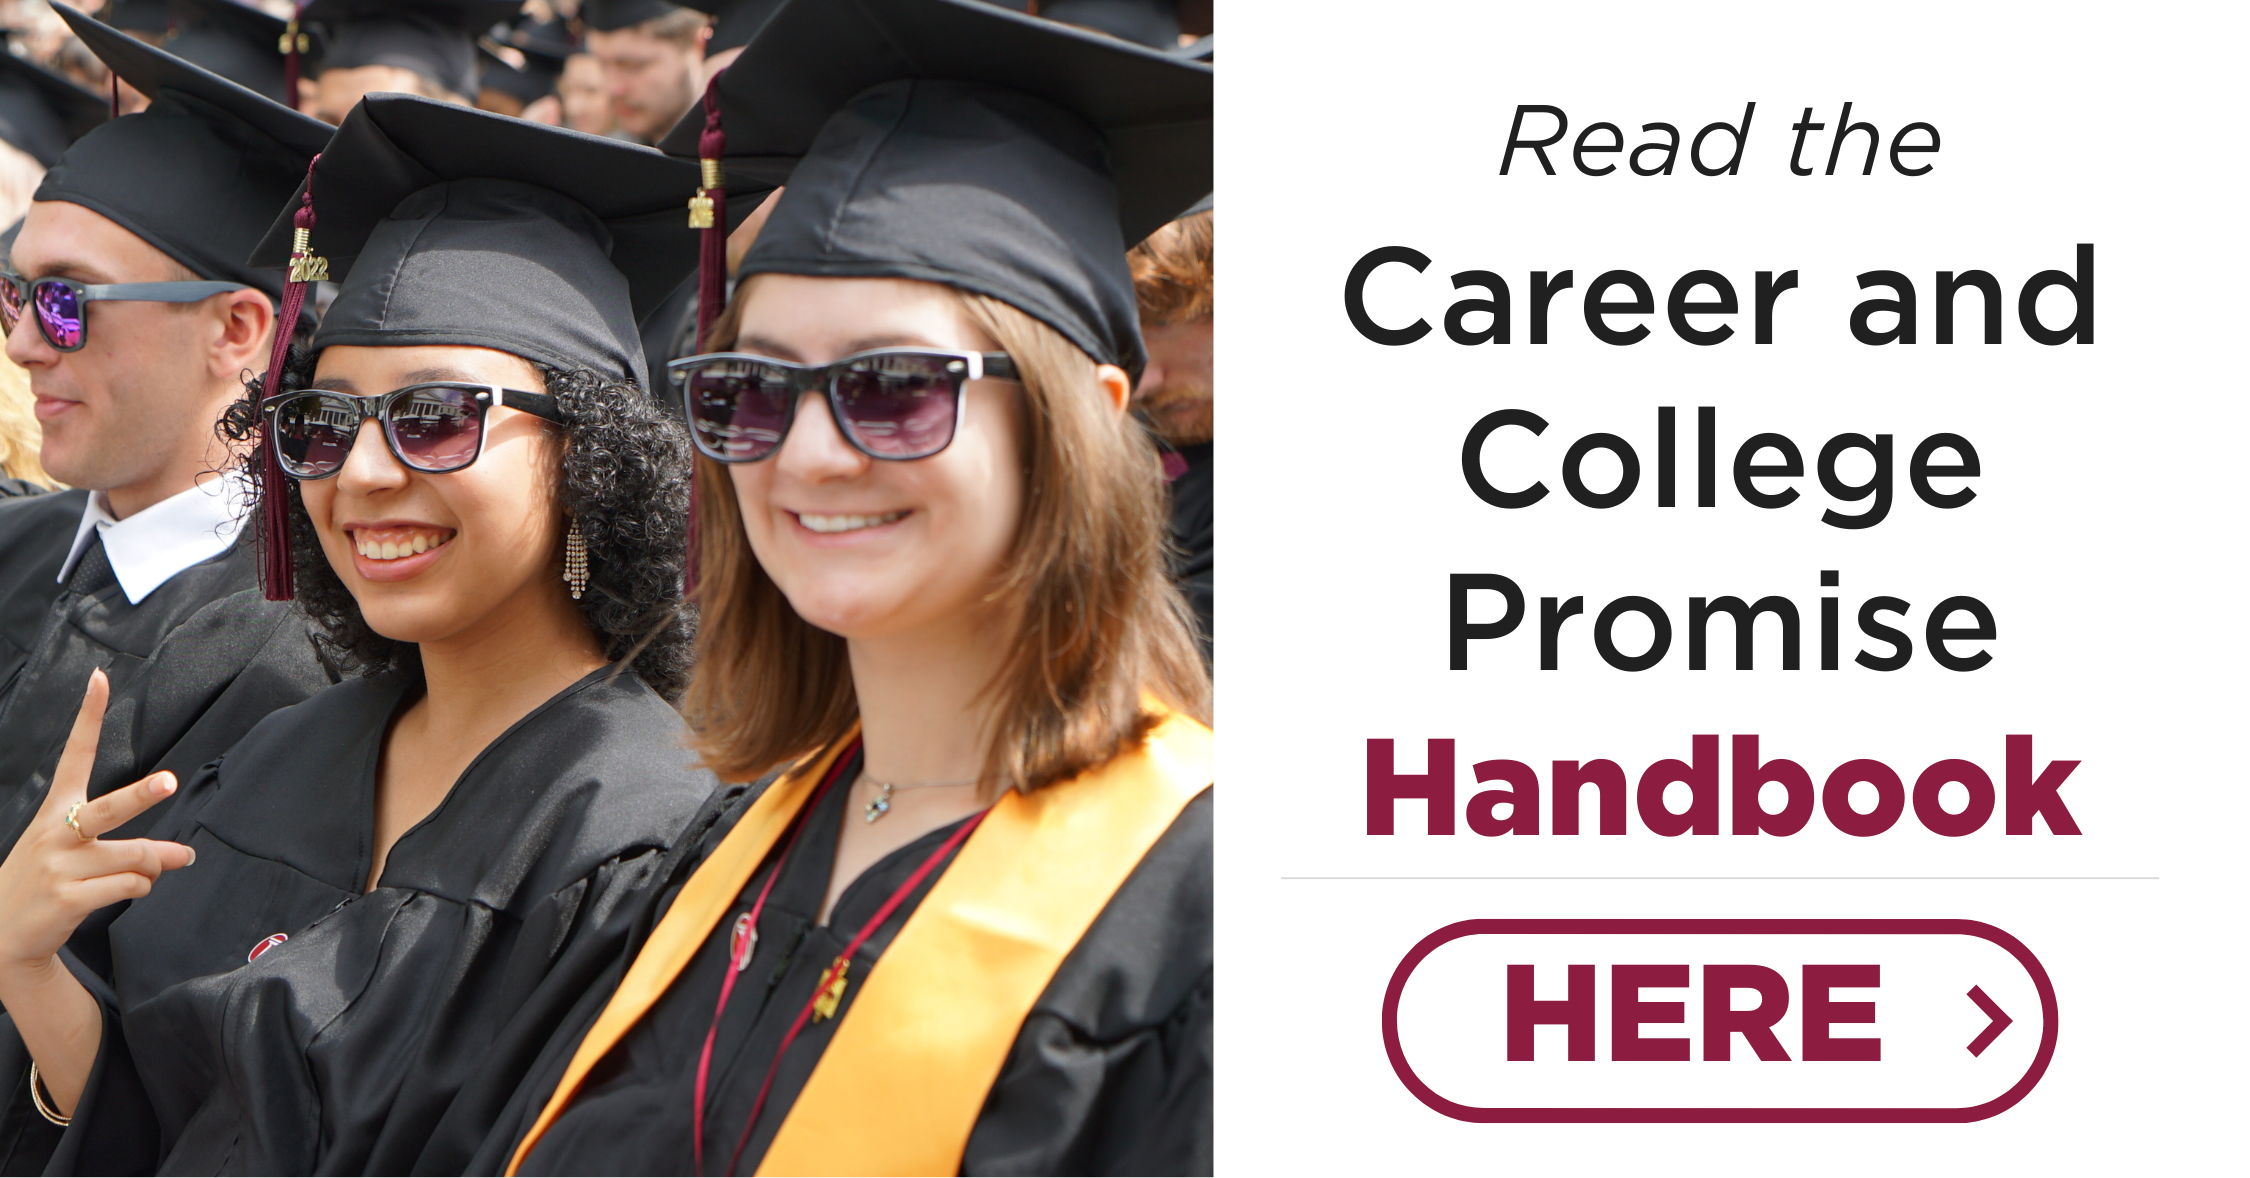 Banner that reads "Career and College Promise Handbook". Click the banner to access the handbook.